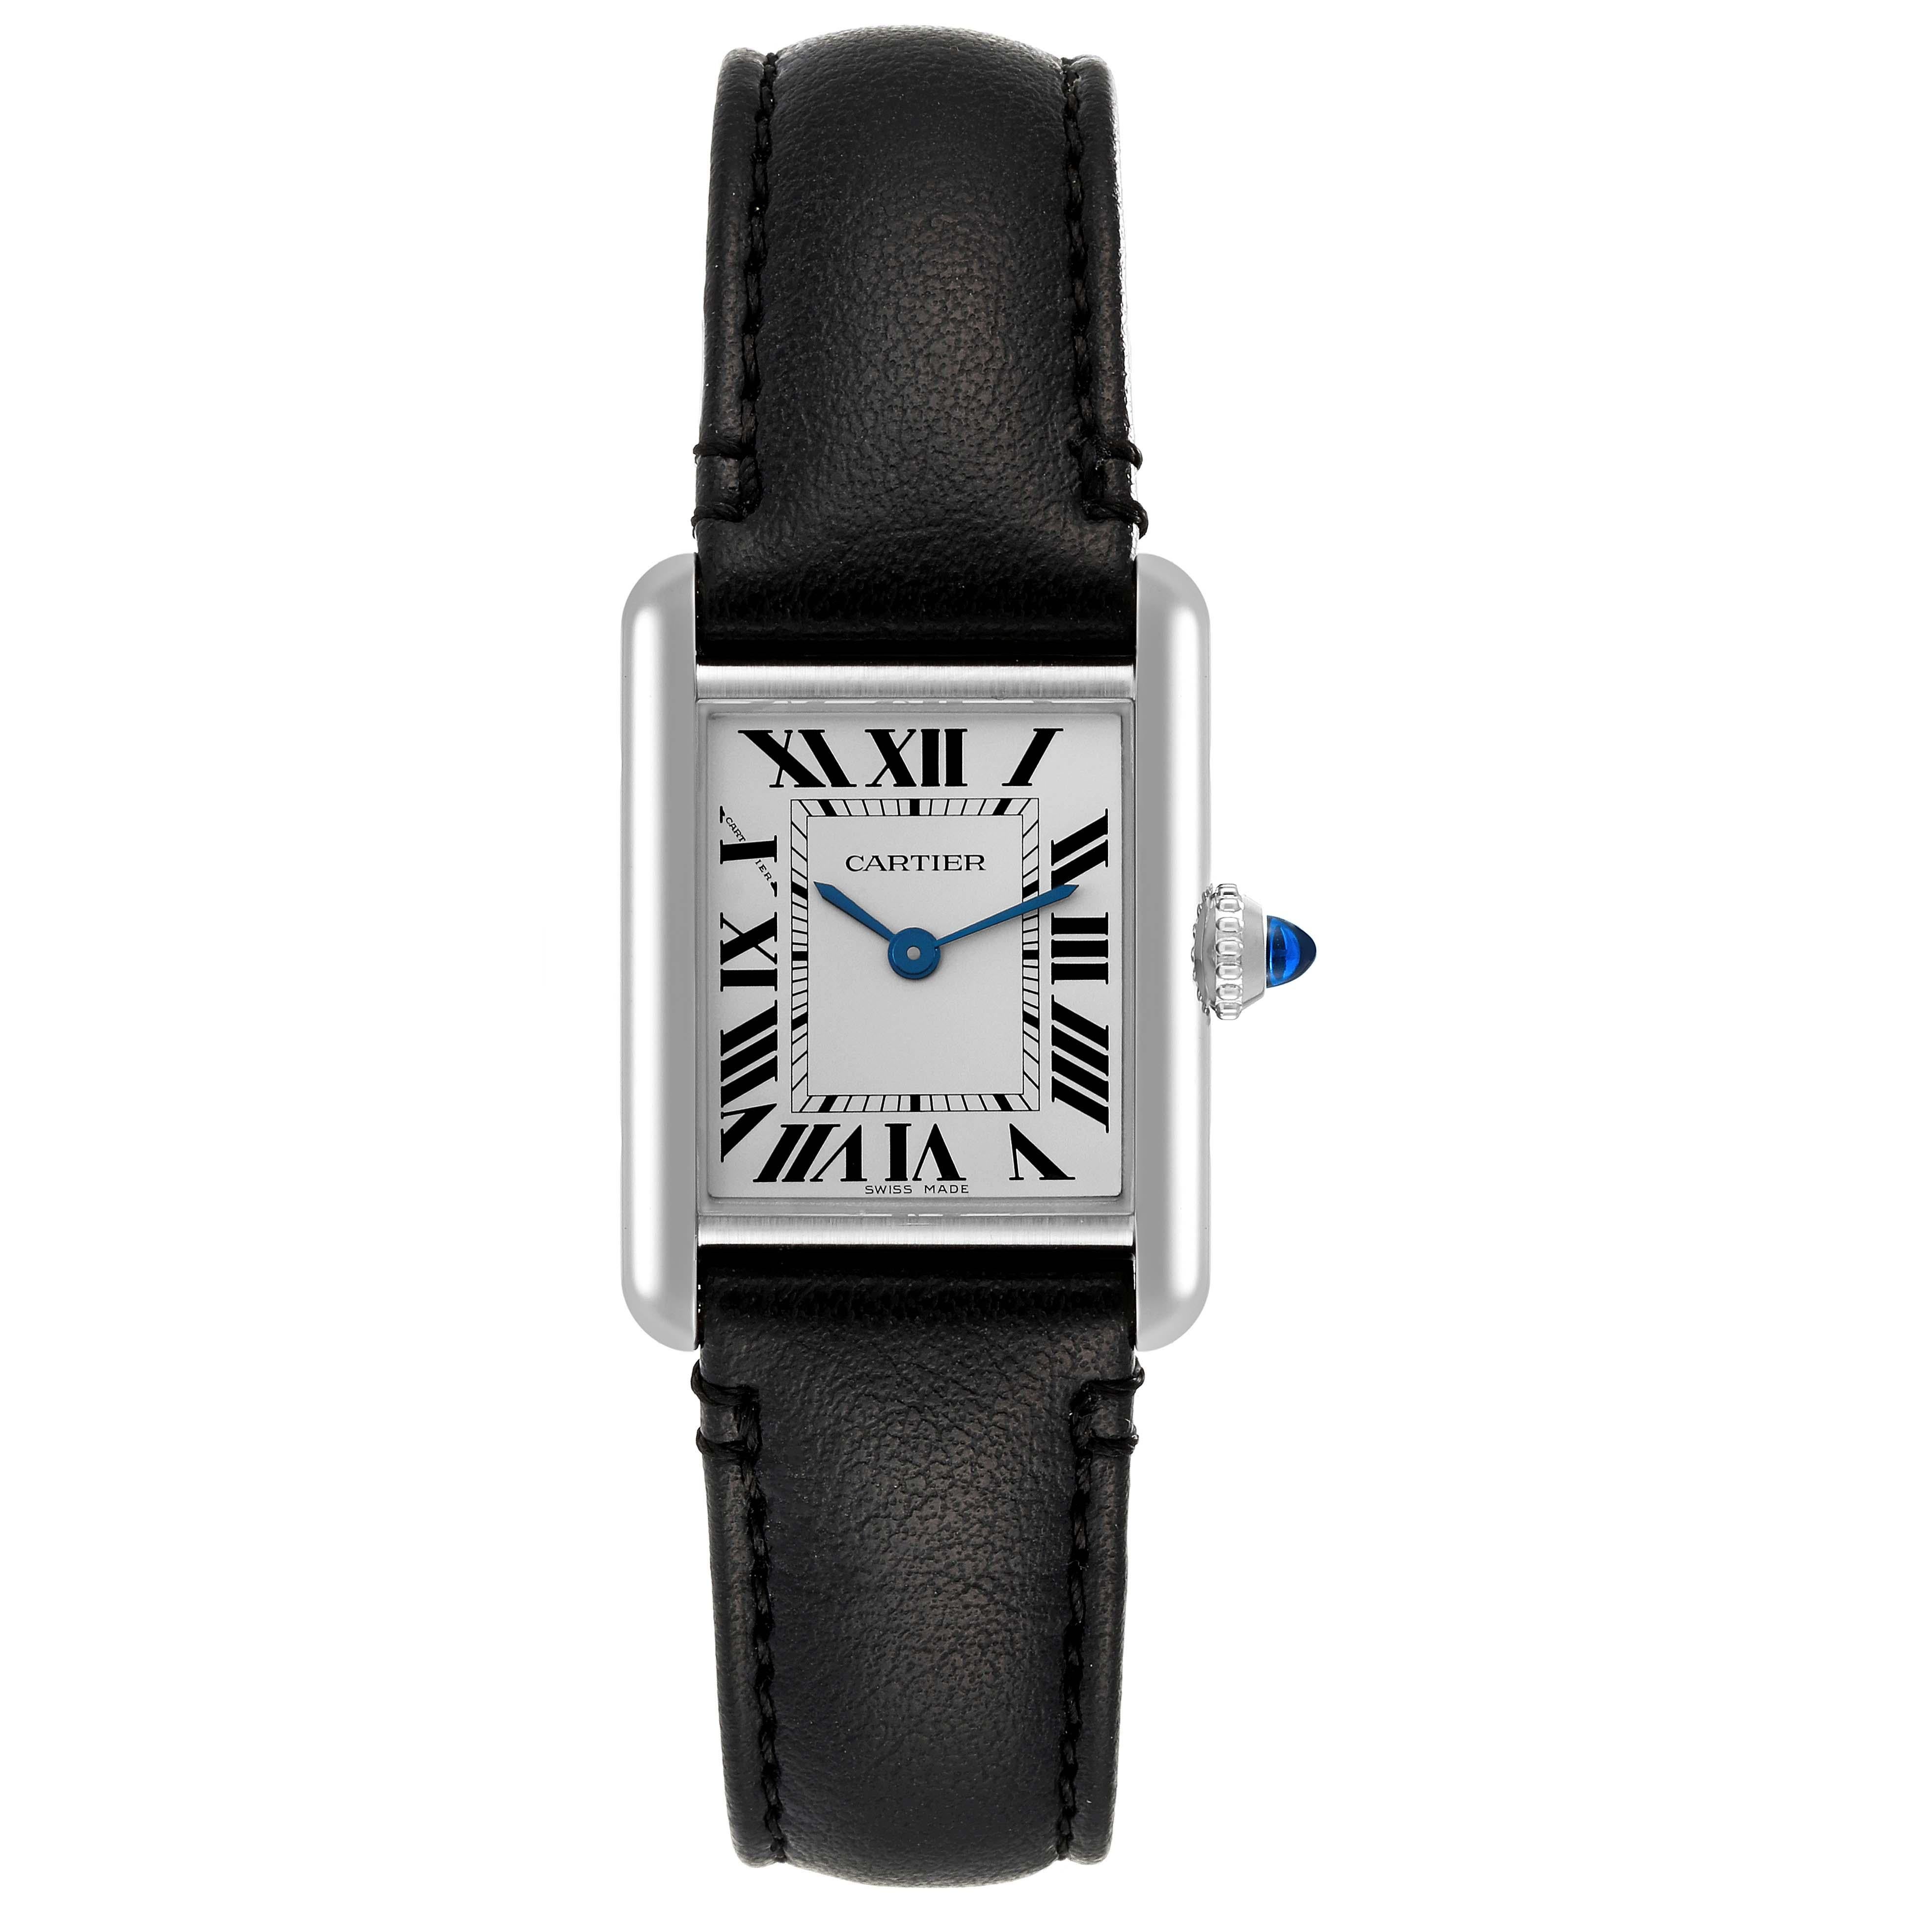 Cartier Tank Must Small Steel Silver Dial Ladies Watch WSTA0060. Quartz movement. Stainless steel case 29.5 x 22 mm. Circular grained crown set with the blue spinel cabochon. . Scratch resistant sapphire crystal. Silver dial with Roman numeral hour